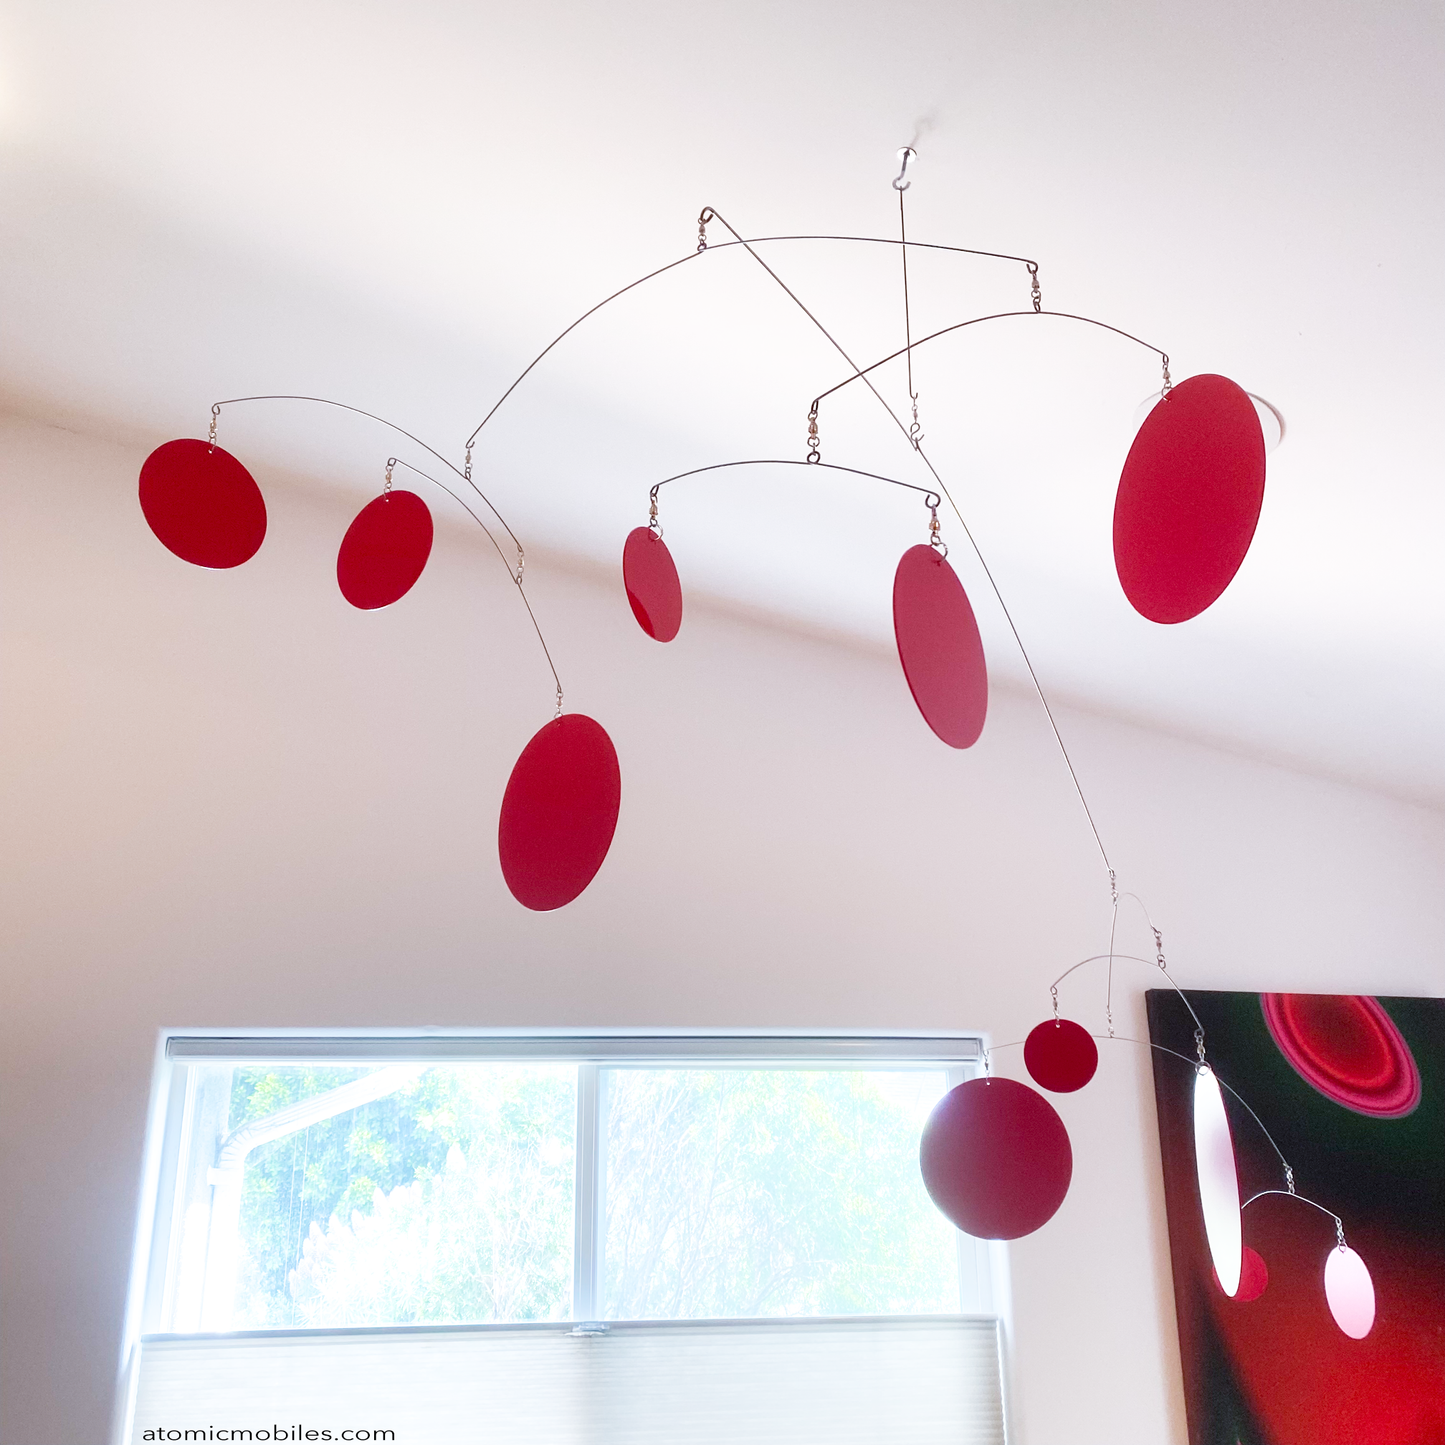 View from below XL Red Kinetic Hangng Art Mobile by AtomicMobiles.com - large red circles in large mobile in dining room over wood table made in Los Angeles